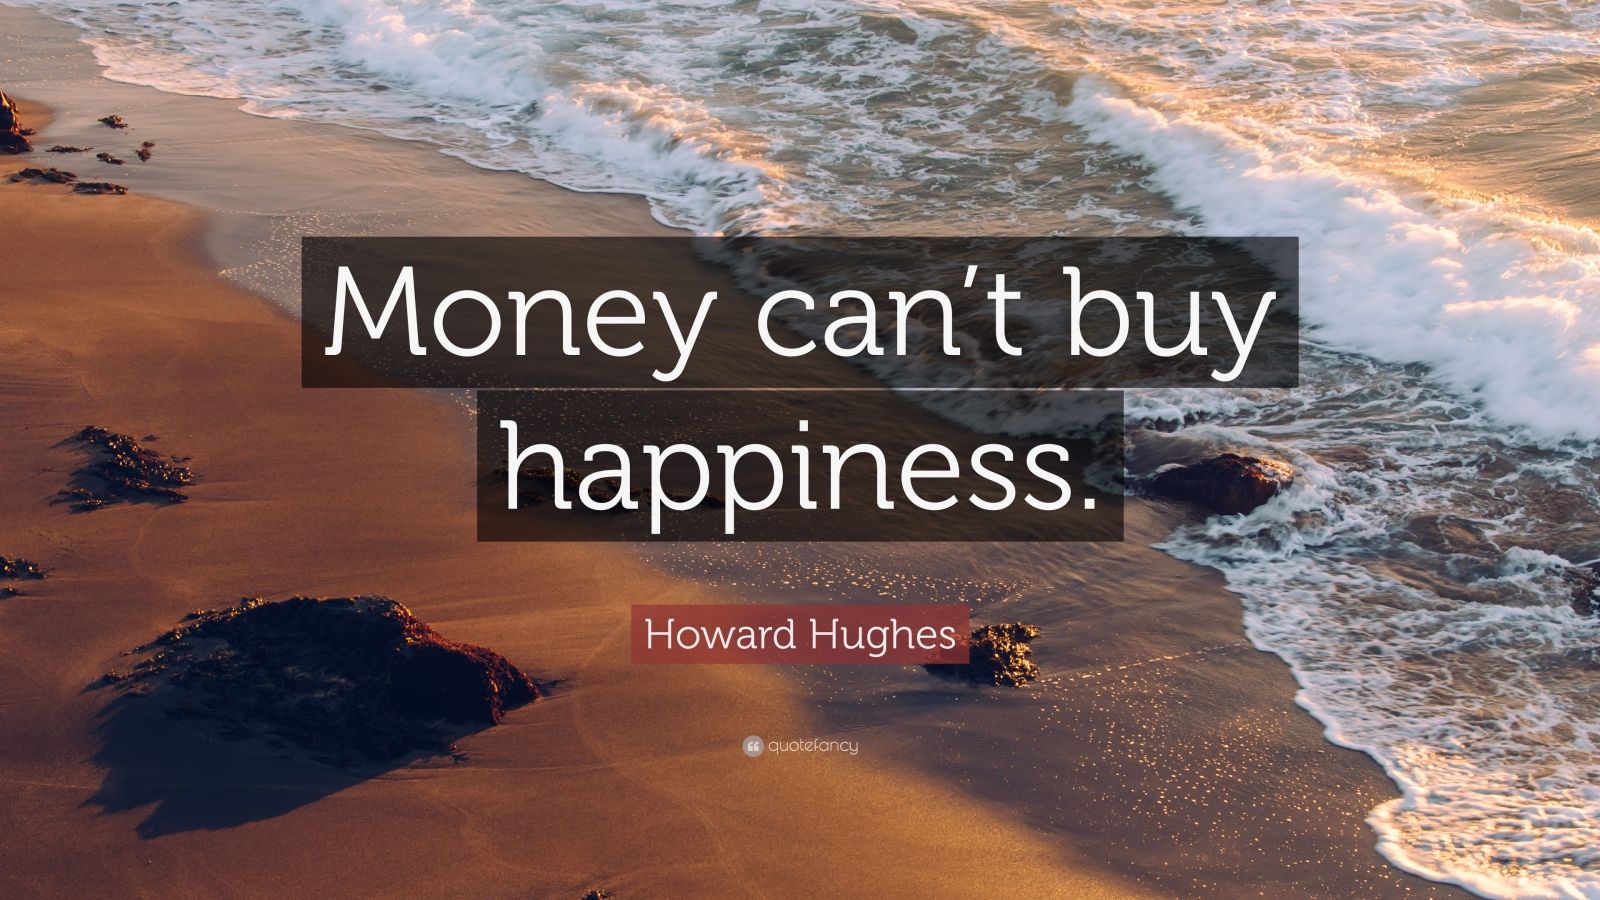 presentation about money can't buy happiness